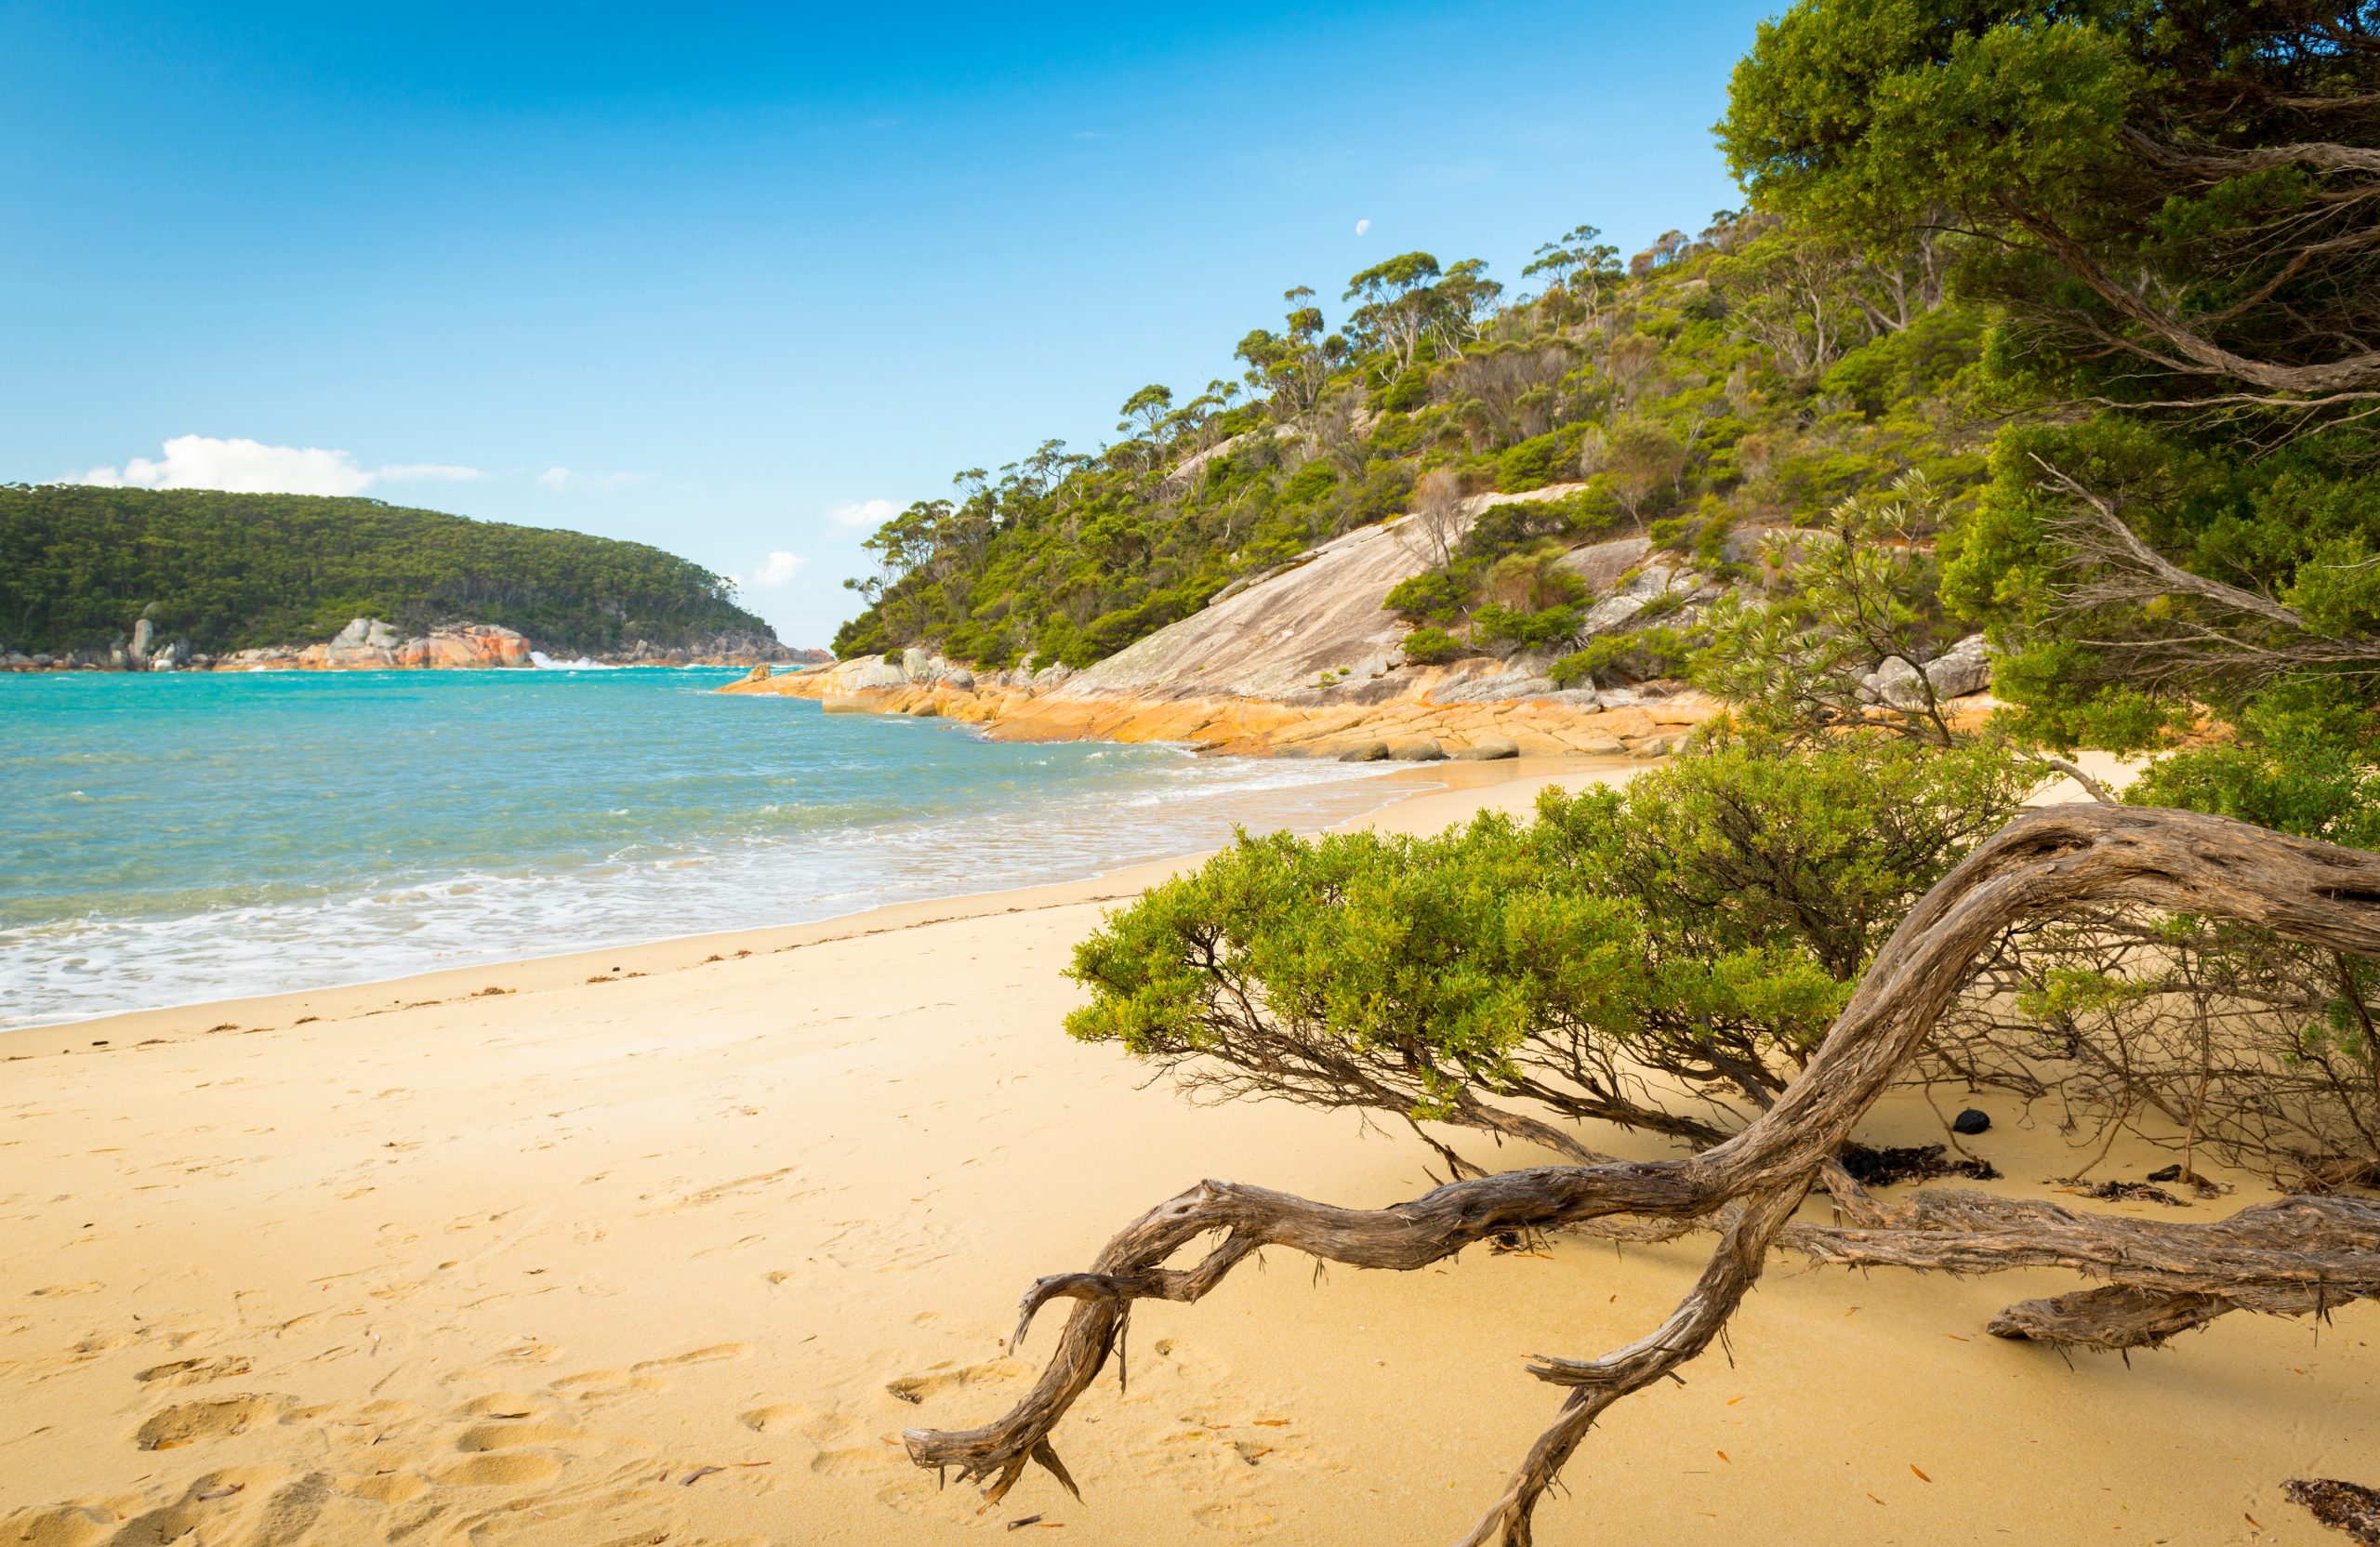 Weathered trees line the beach at Refuge Cove, in Wilsons Promontory National Park, Victoria, Australia.